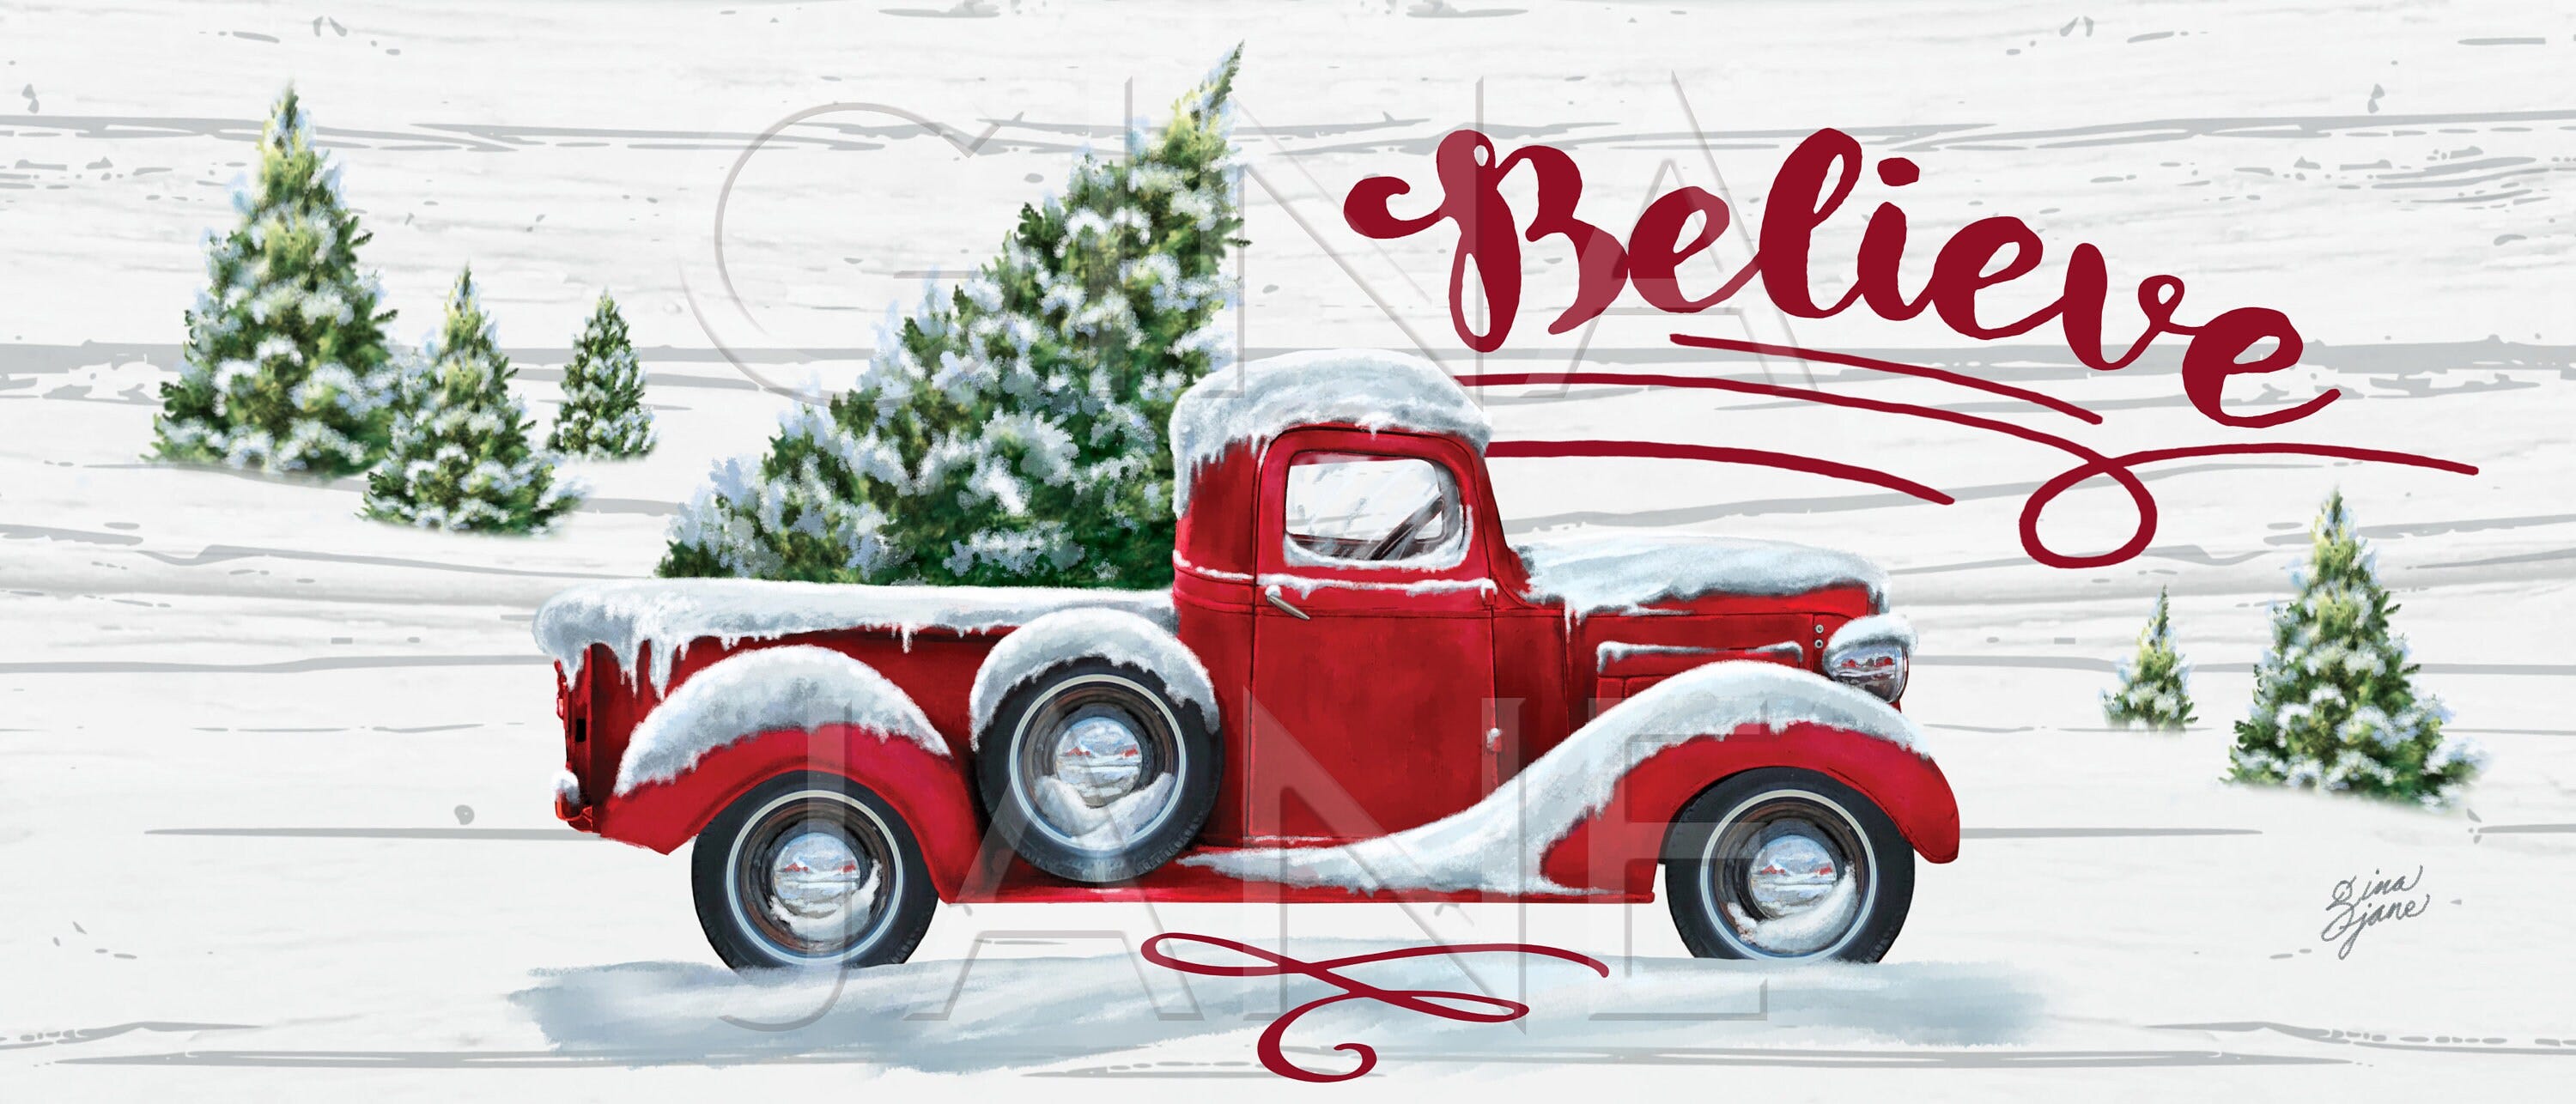 Frontier Woman Pioneer Christmas Red Truck Decor | DIY Craft Wreath Decor - Red Truck Christmas Tree Believe SIGN Home Decor